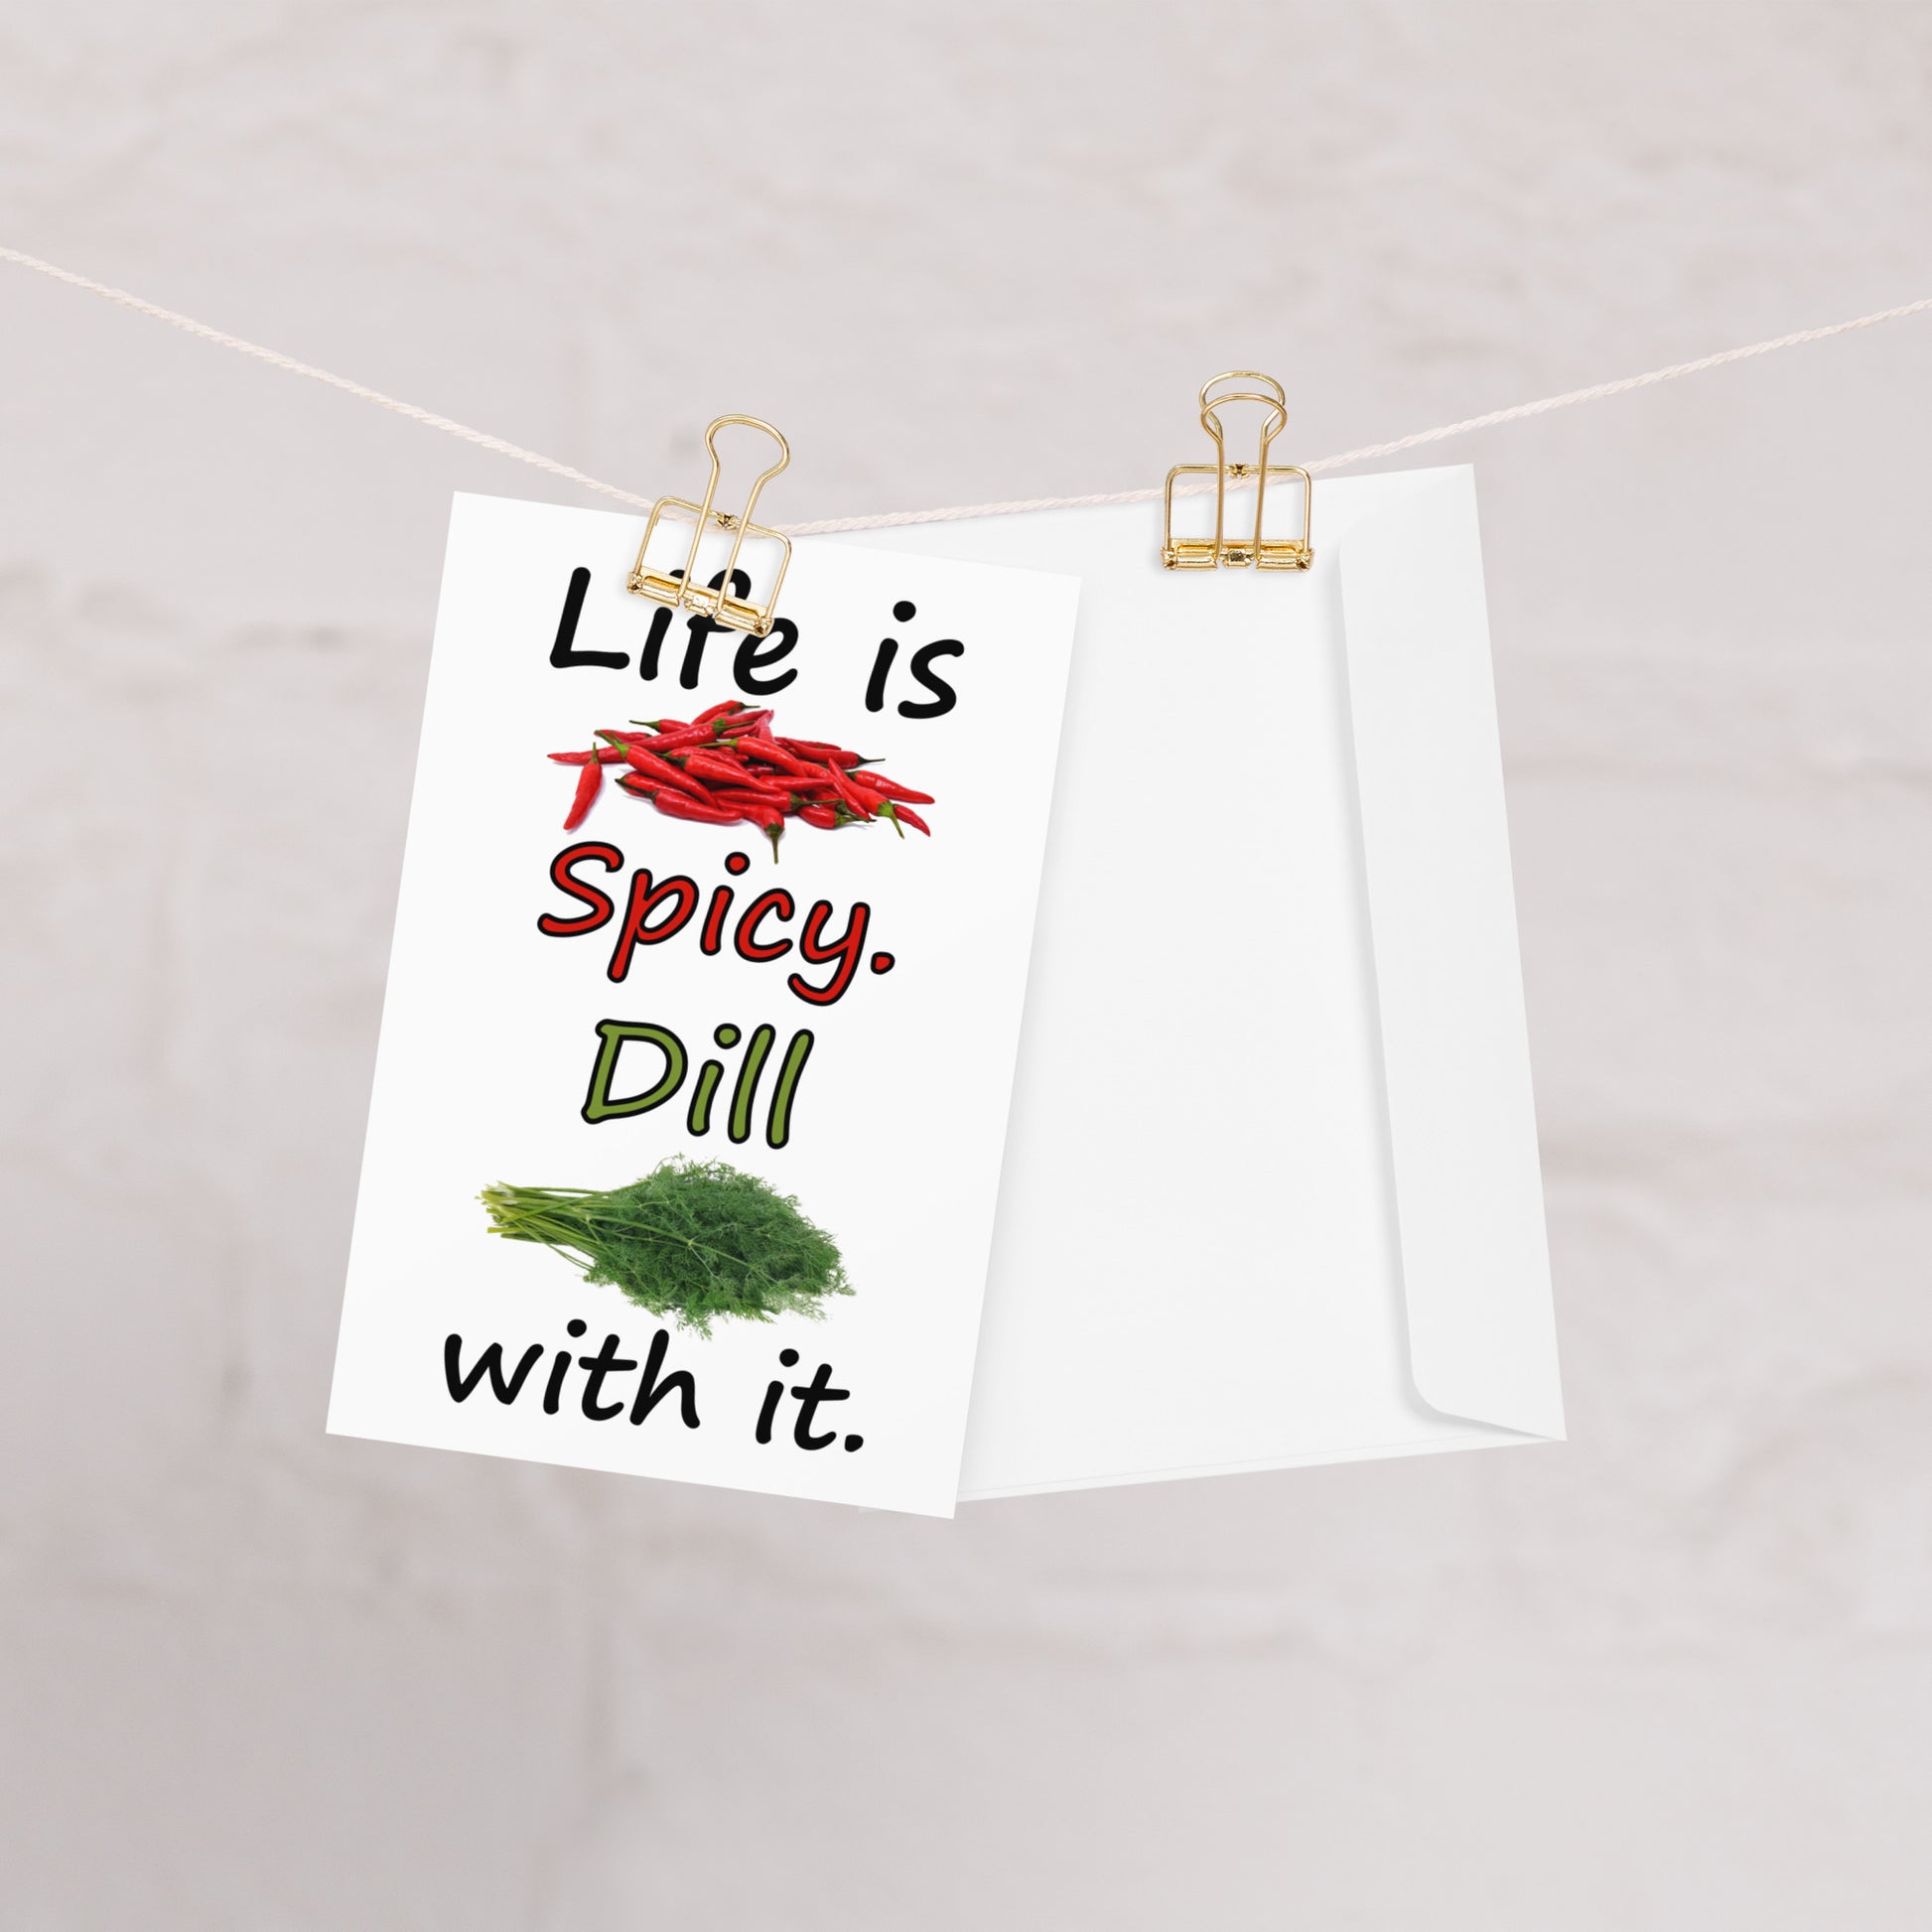 4 by 6 inch Life Is Spicy greeting card. Features Life is Spicy, Dill With It text, with image of chili peppers and dill weed on the front. The inside is blank. Comes with a white envelope. Card is made of durable paperboard with vibrant printing. Card shown on clothesline with white envelope.